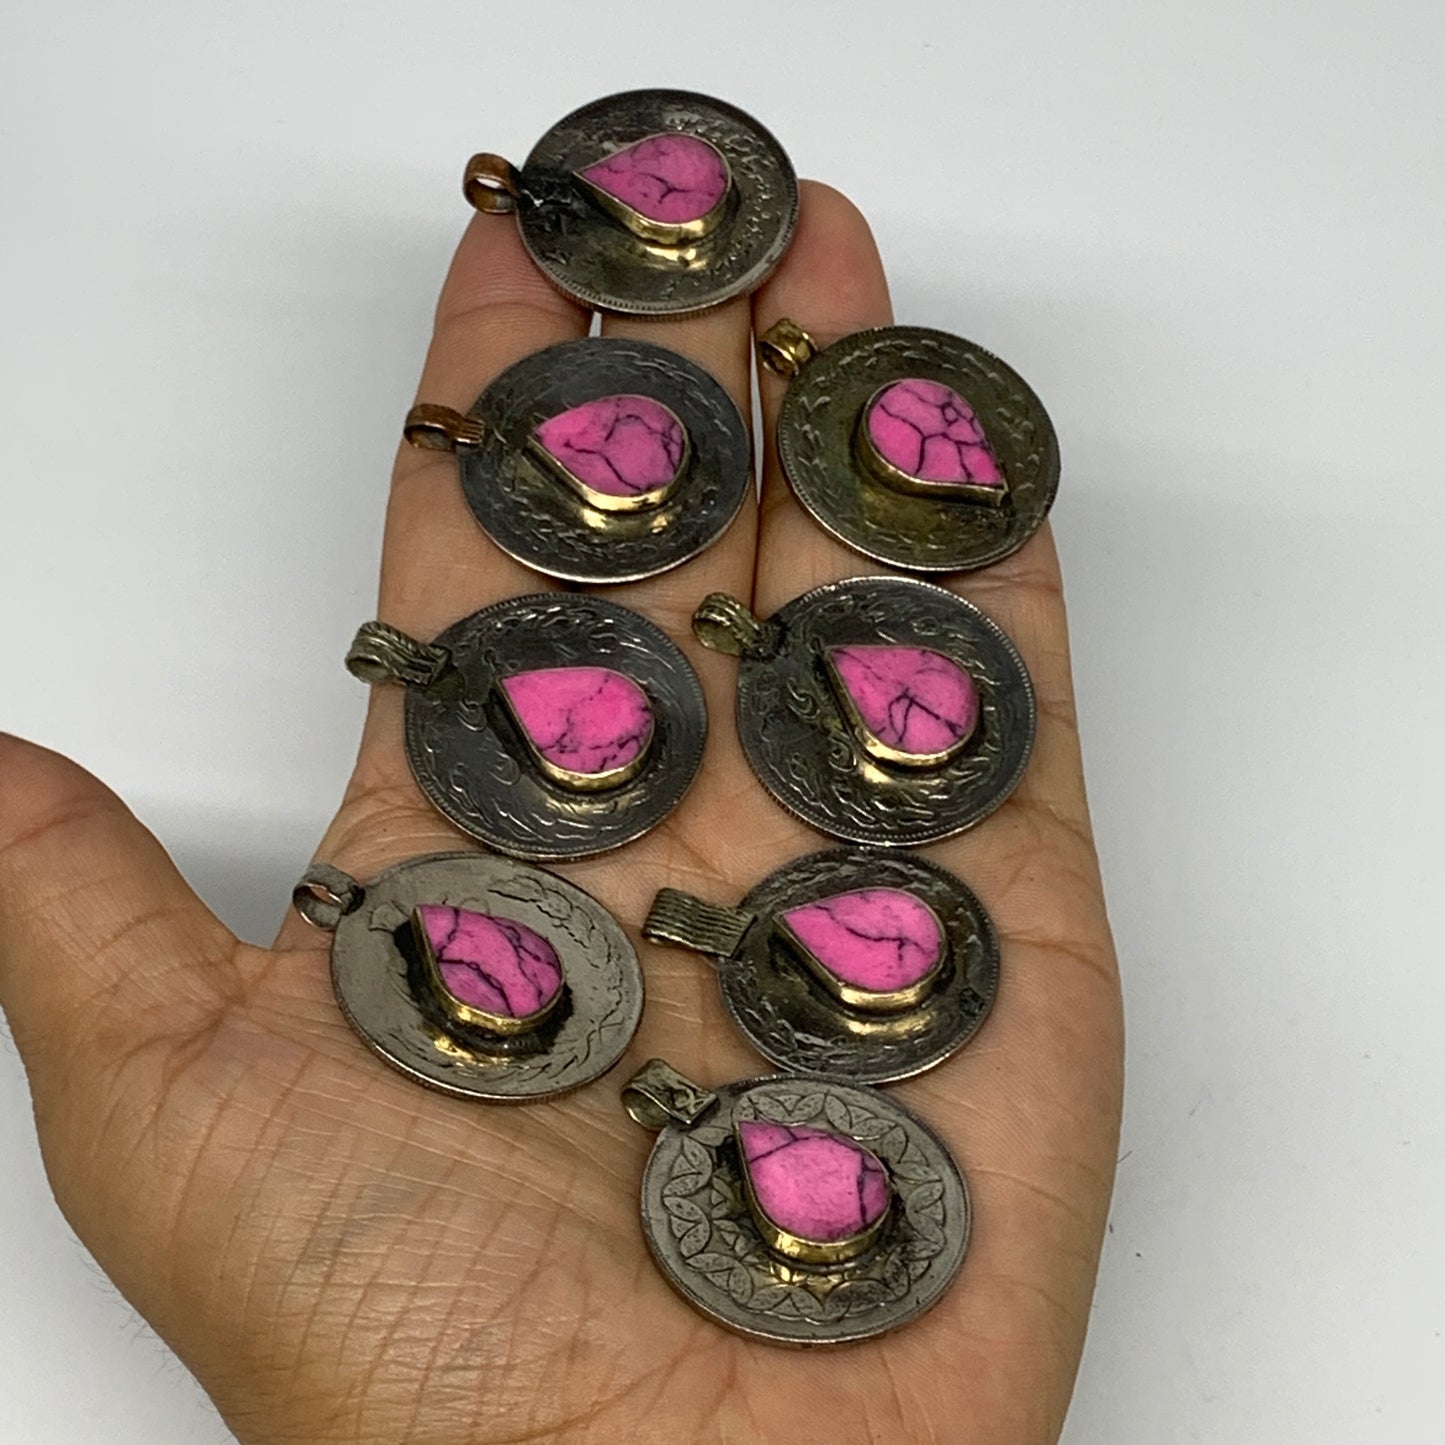 81g, 8pcs, Turkmen Coins Jeweled Synthetic Pink Tribal @Afghanistan, B14530